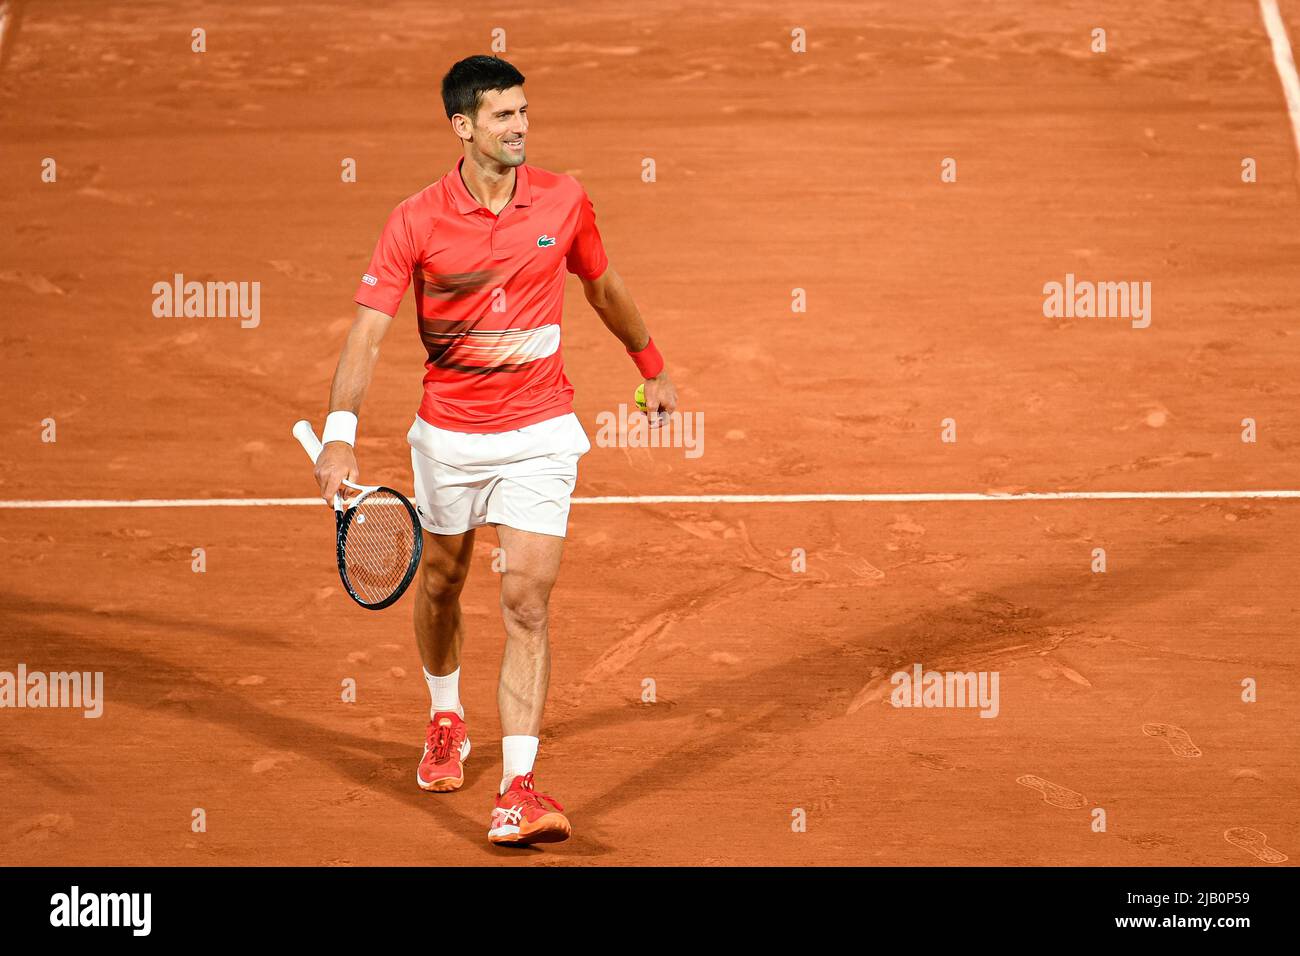 Paris, France. 31st May, 2022. Novak Djokovic of Serbia during the French Open semifinal against Rafael Nadal, Grand Slam tennis tournament on May 31, 2022 at Roland-Garros stadium in Paris, France - Credit: Victor Joly/Alamy Live News Stock Photo